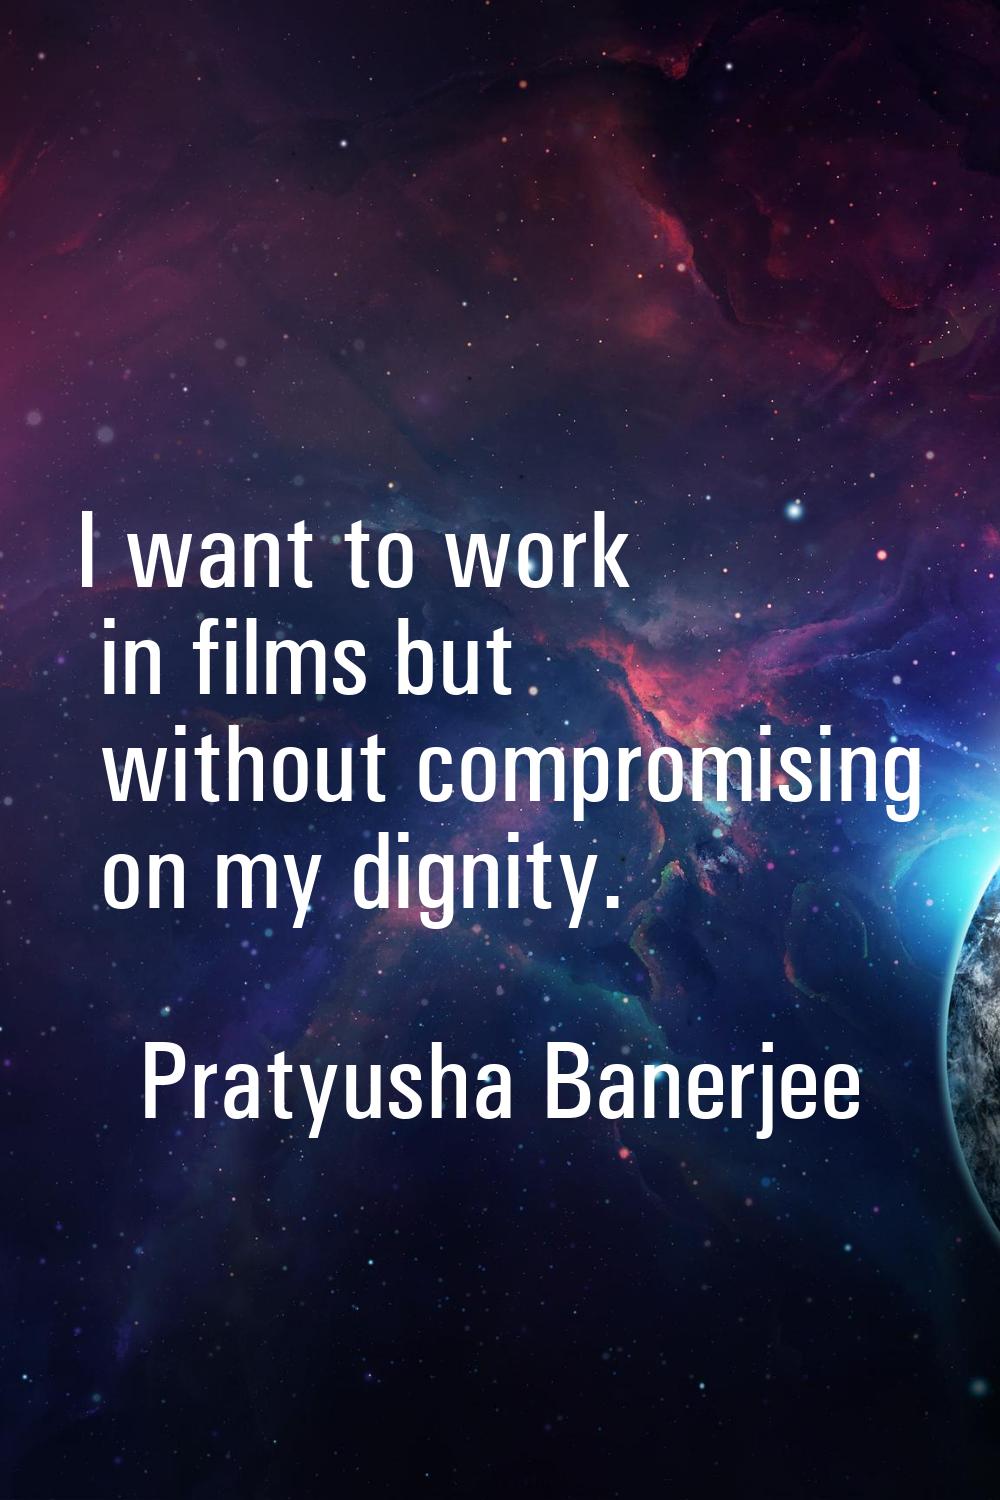 I want to work in films but without compromising on my dignity.